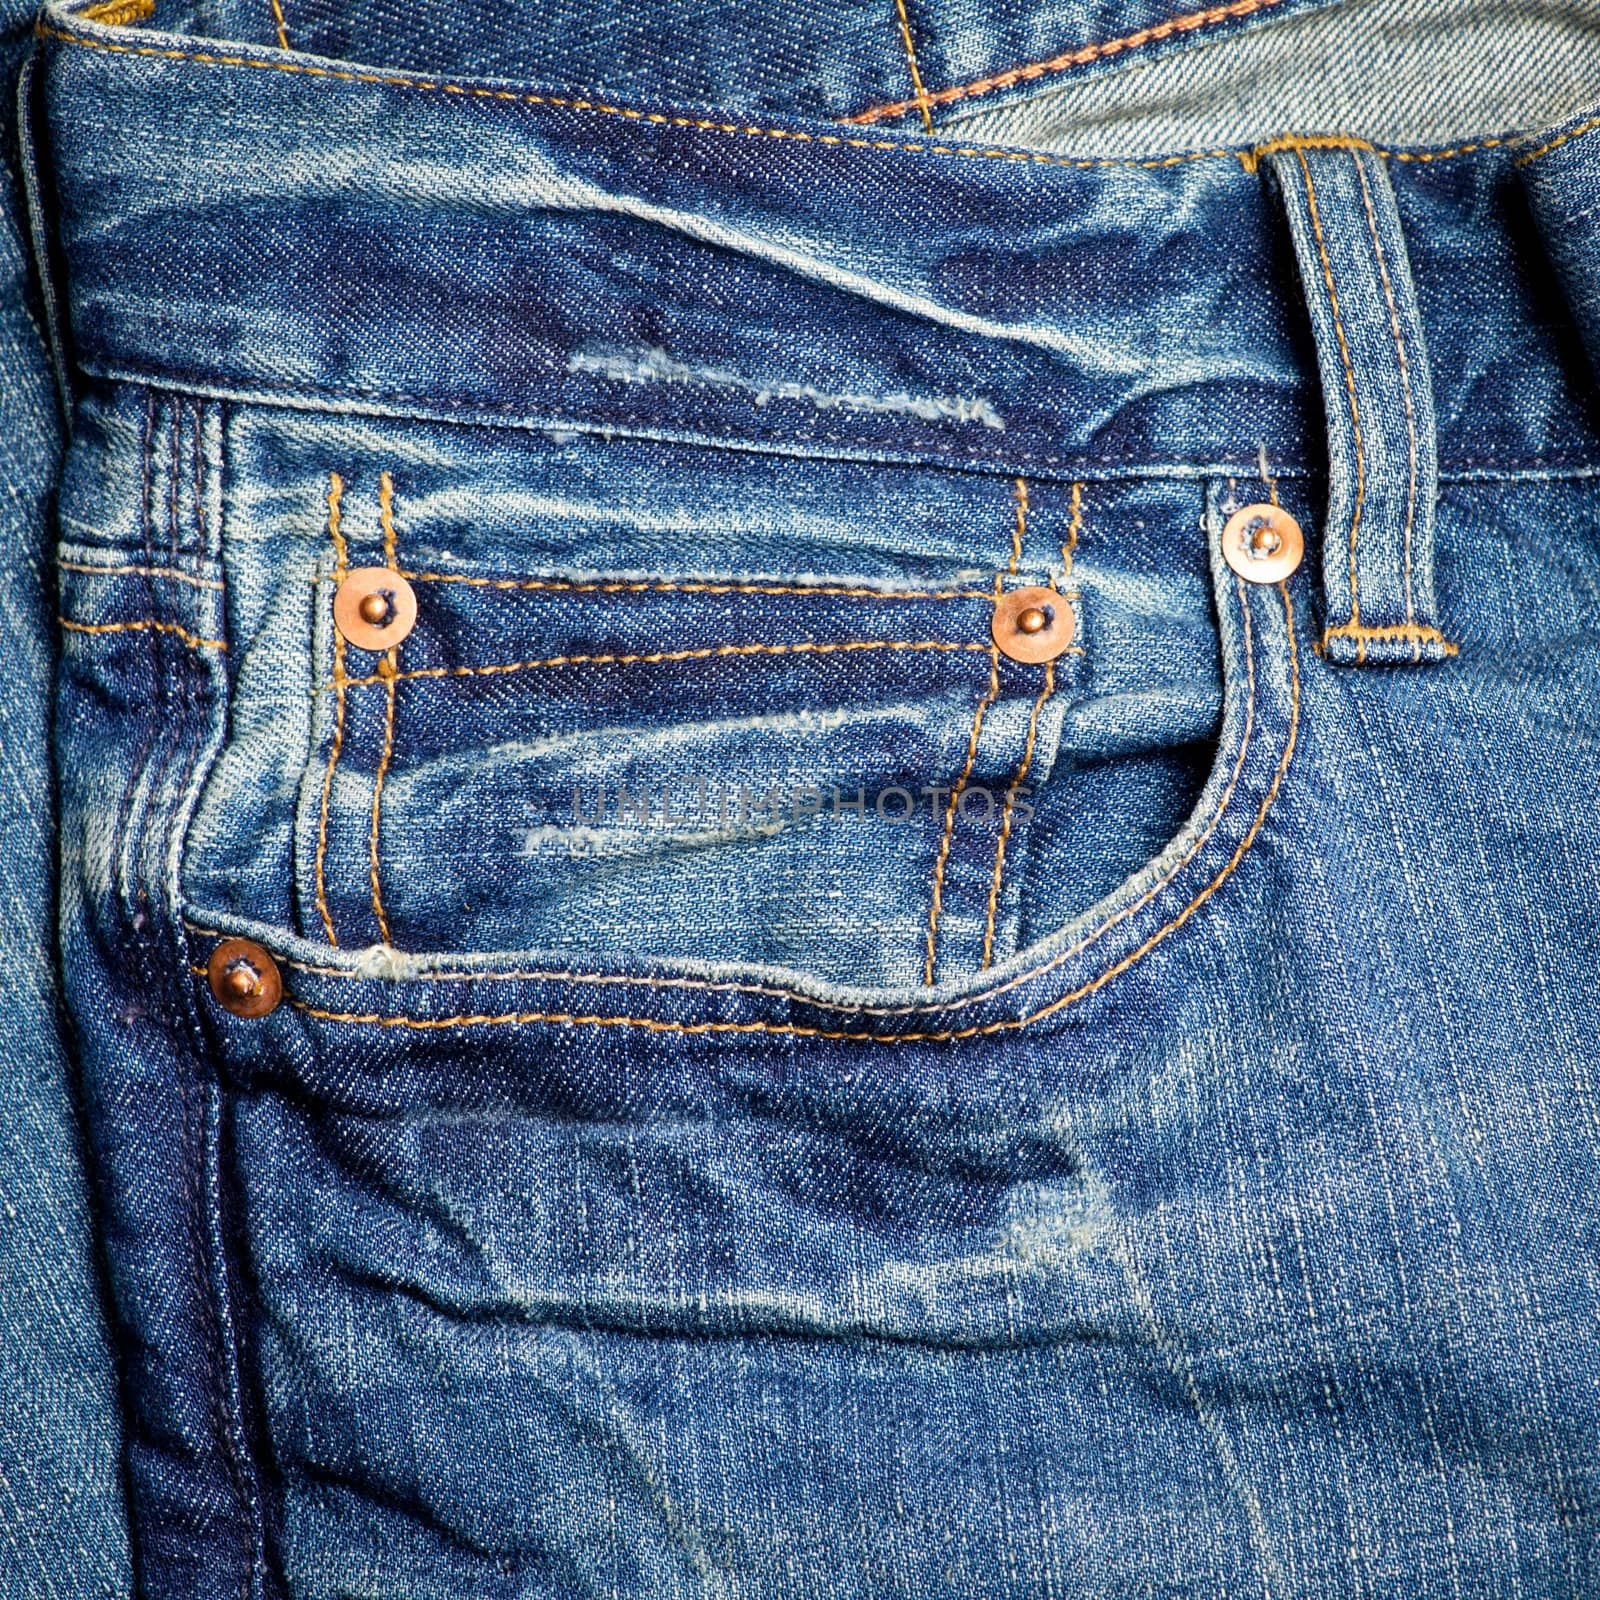 Blue jeans detail with empty pocket